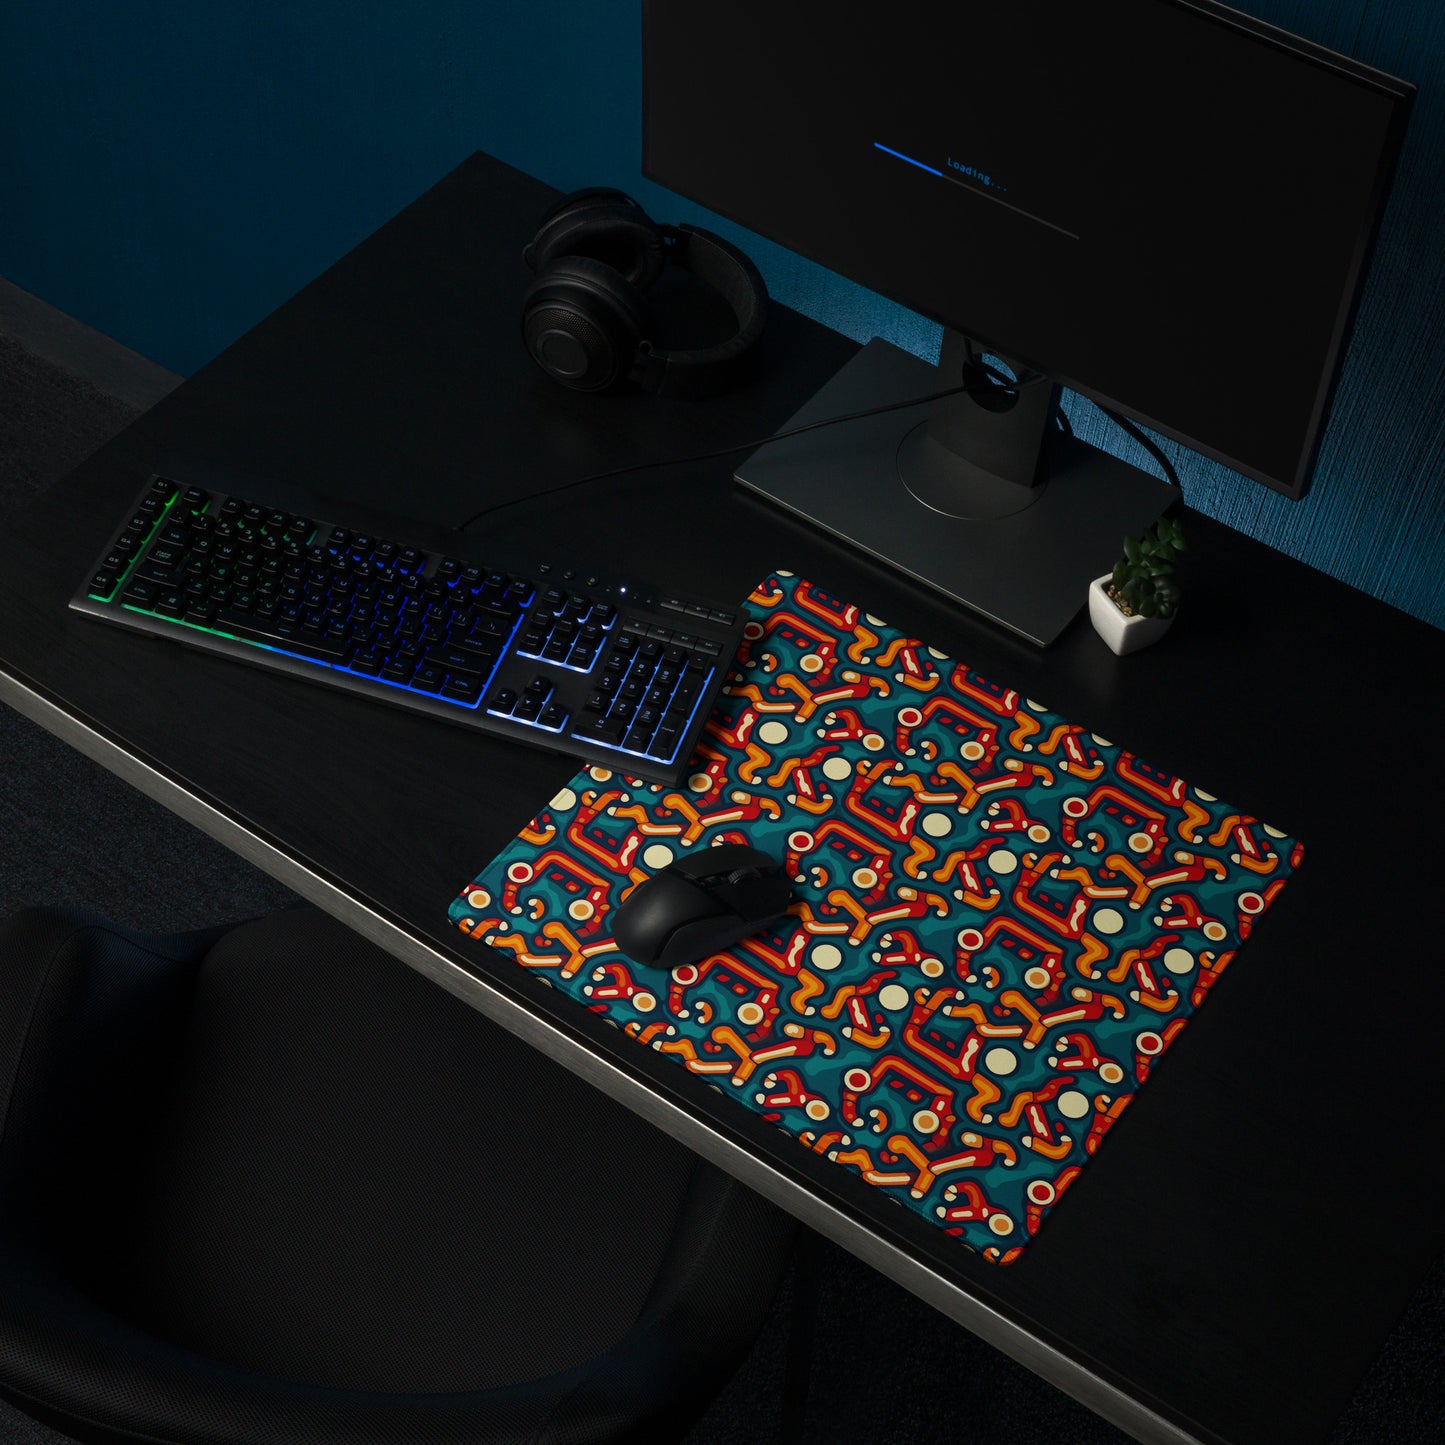 A 18" x 16" desk pad with abstract line art on it shown on a desk setup. Red, Orange and Teal in color.